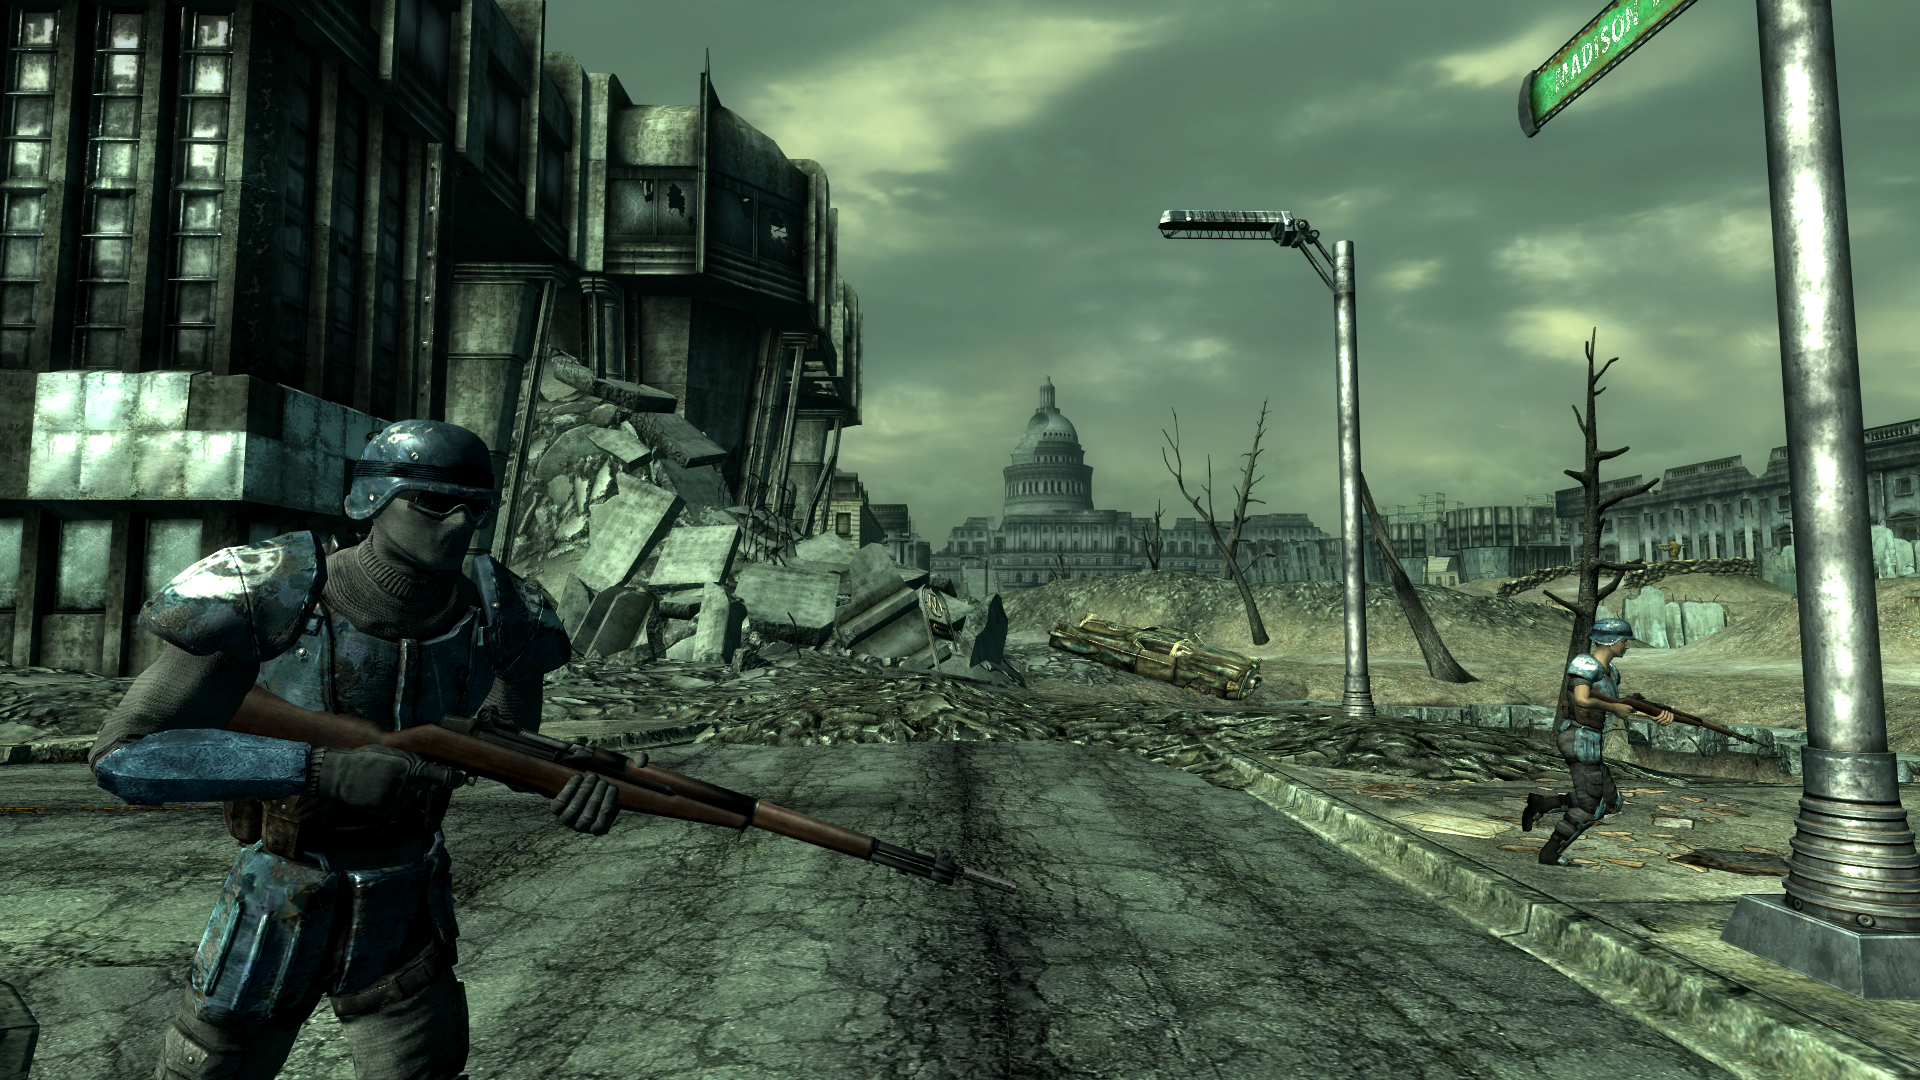 Фол аут. Fallout 3 (2009). Фоллаут 3 4:3. Фоллаут 3 2023. Fallout 3 ремастер.